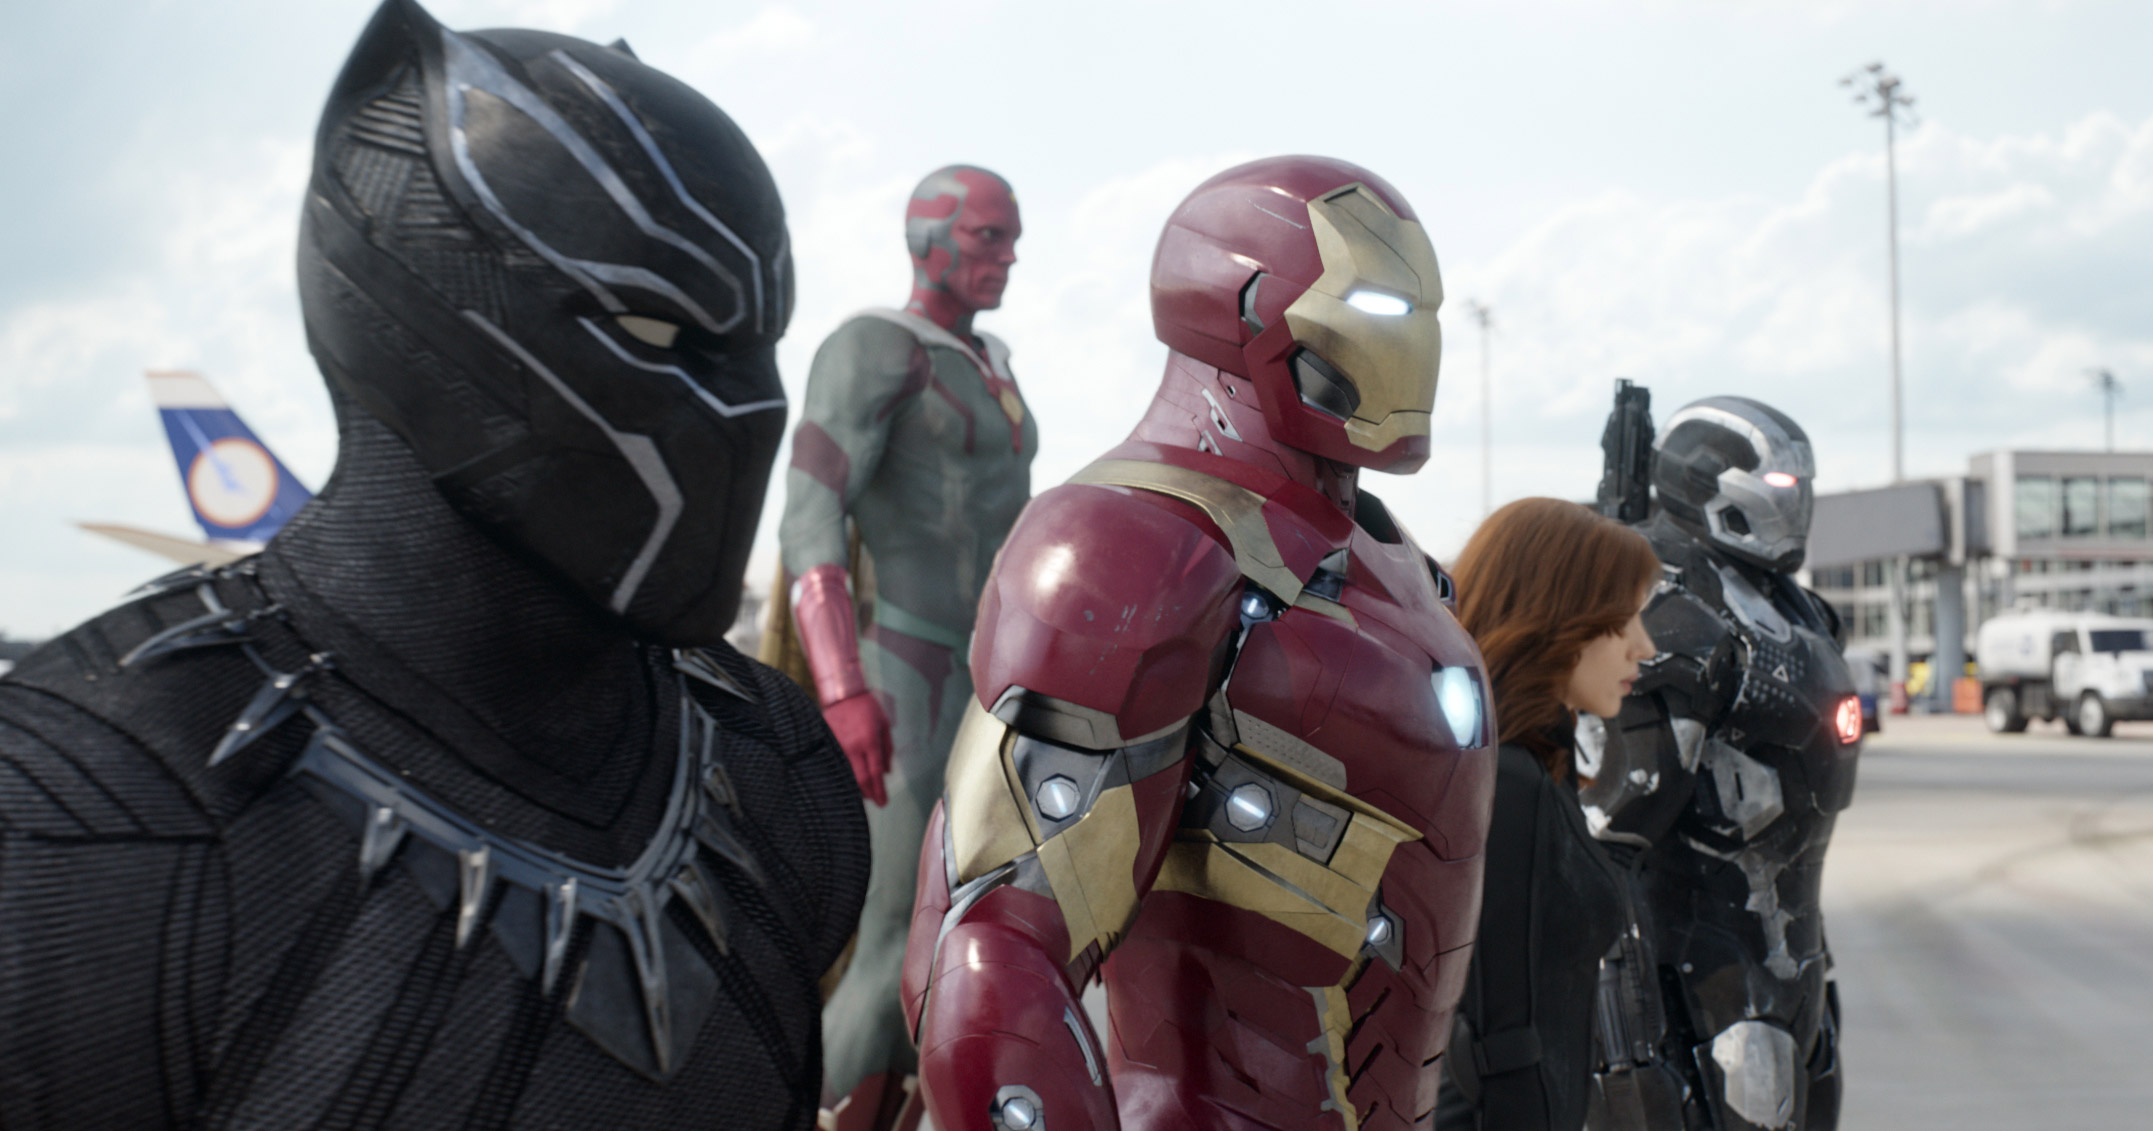 Chadwick Boseman, from left, as Panther, Paul Bettany as Vision, Robert Downey Jr. as Iron Man, Scarlett Johansson as Natasha Romanoff, and Don Cheadle as War Machine in a scene from 